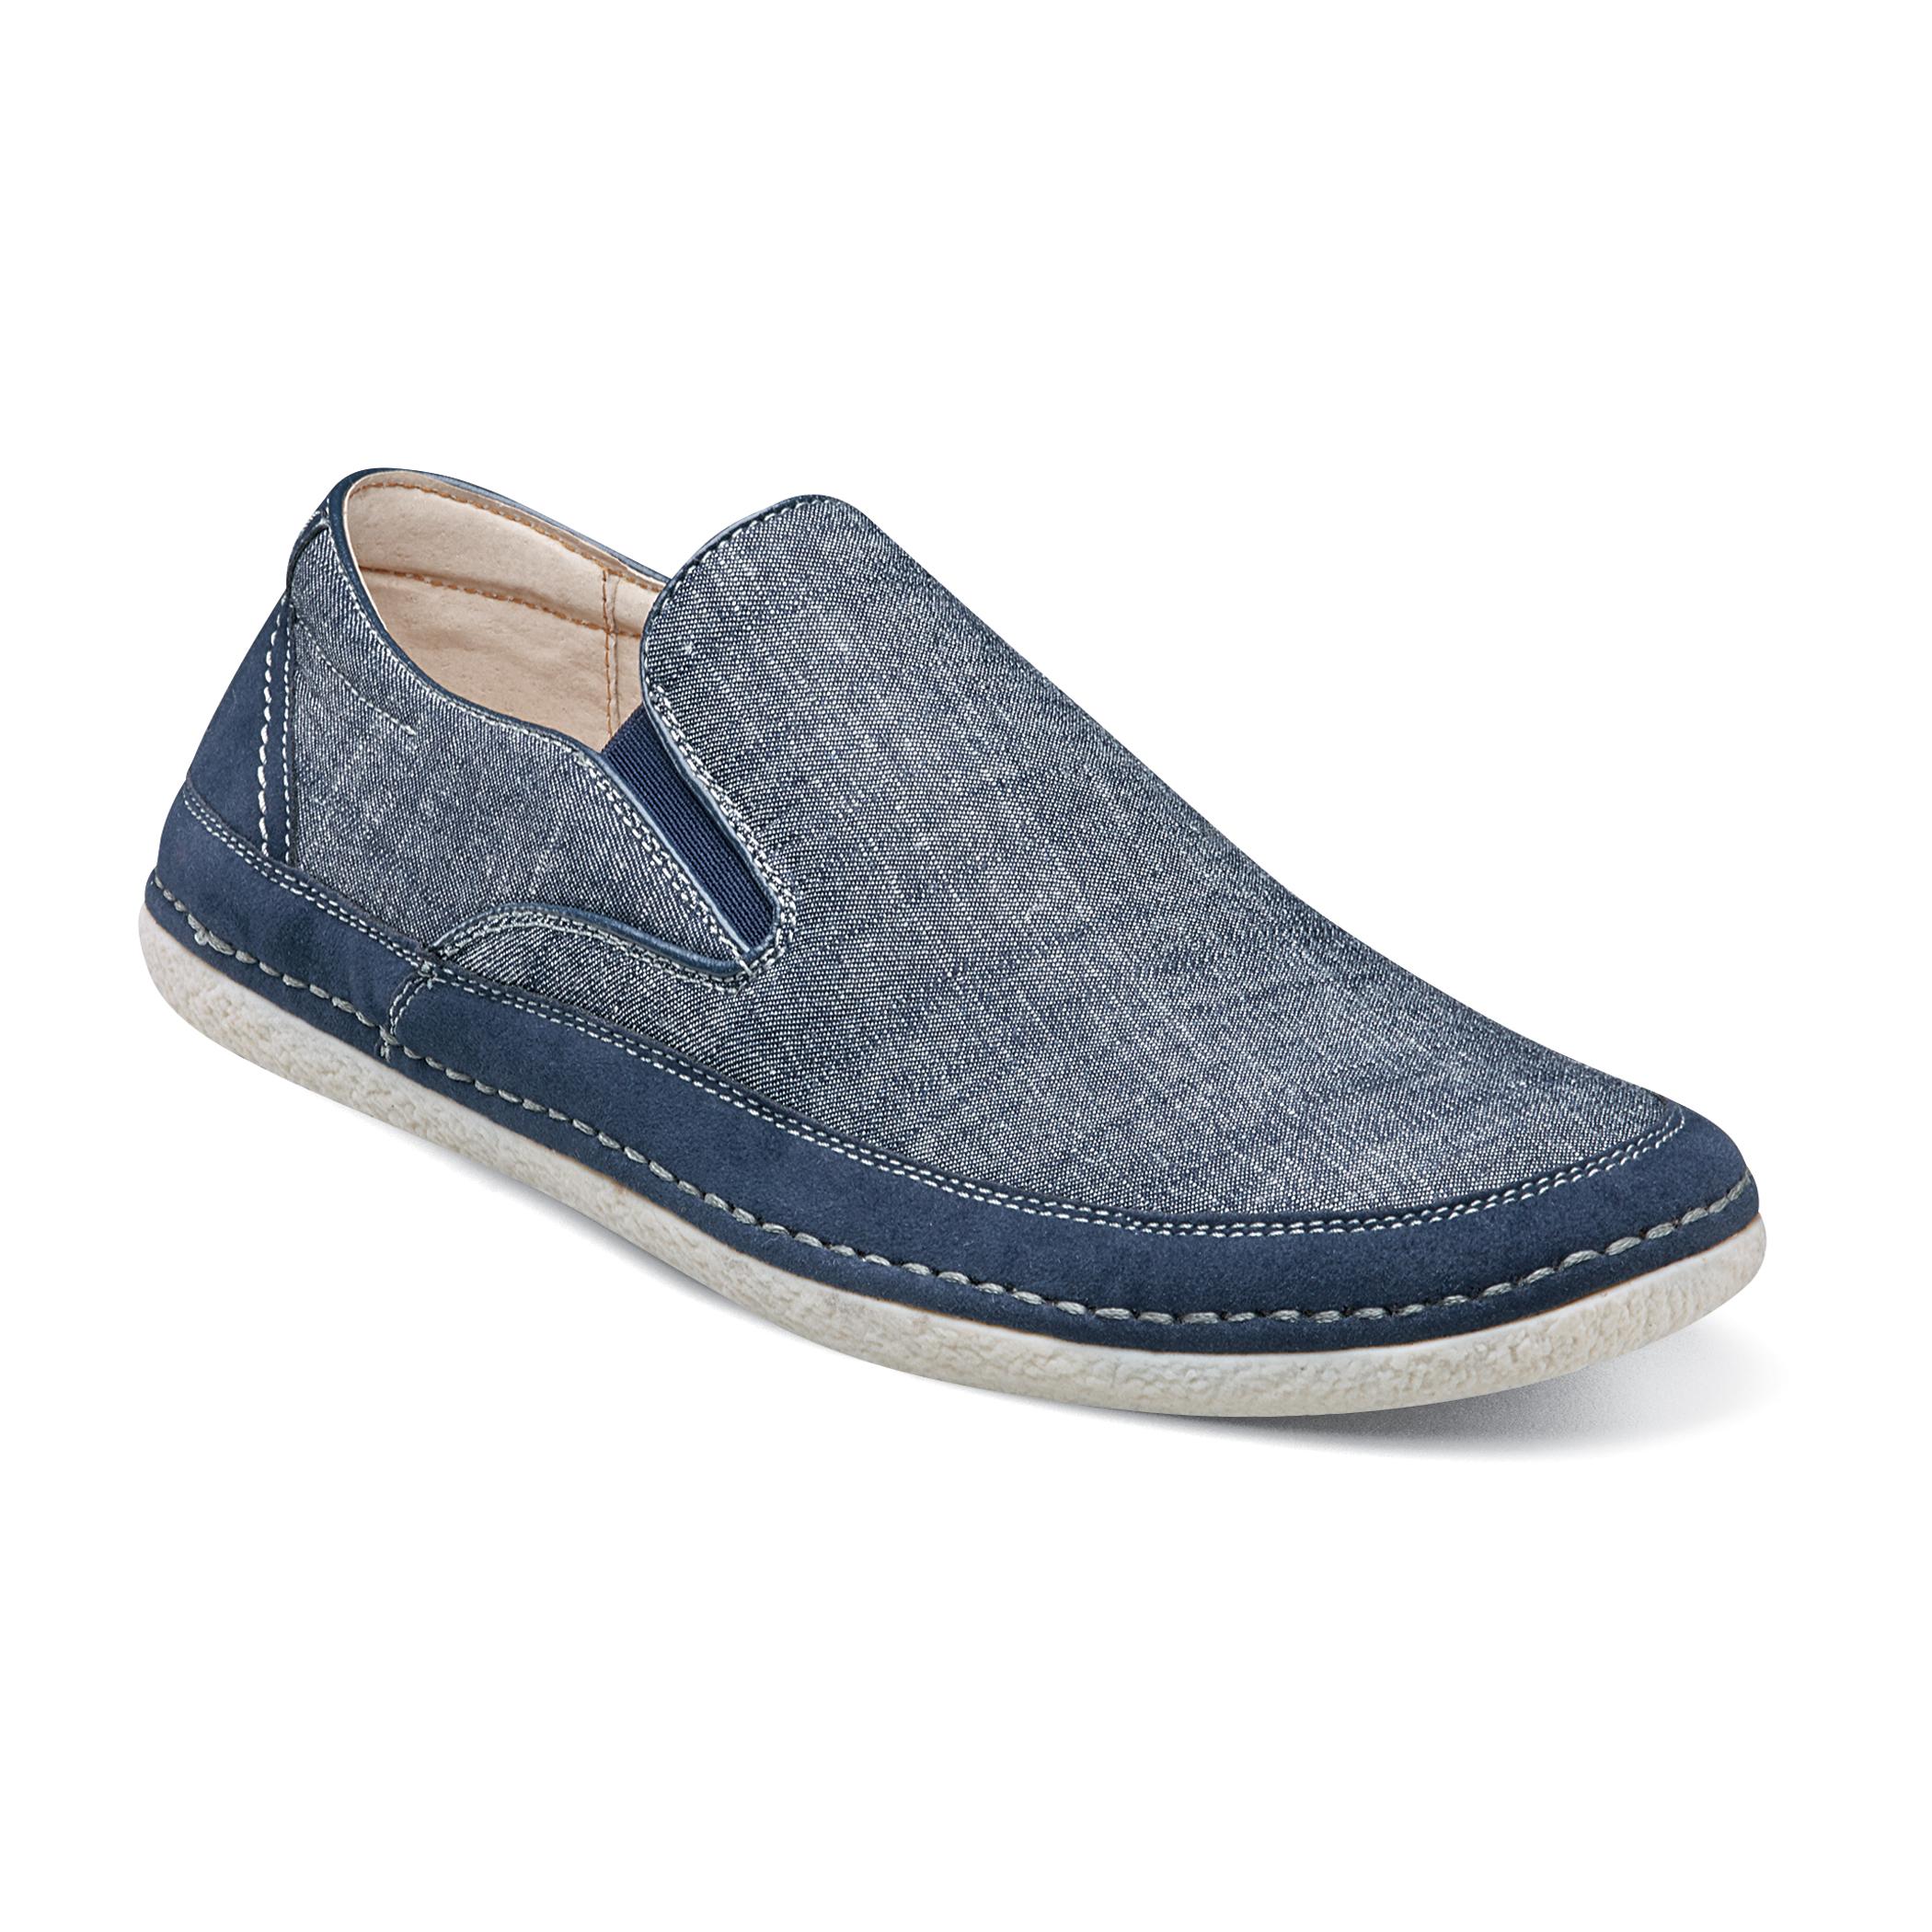 Stacy Adams Newport Blue Canvas Moc Toe Loafer Shoes 24954 - $59.90 ...